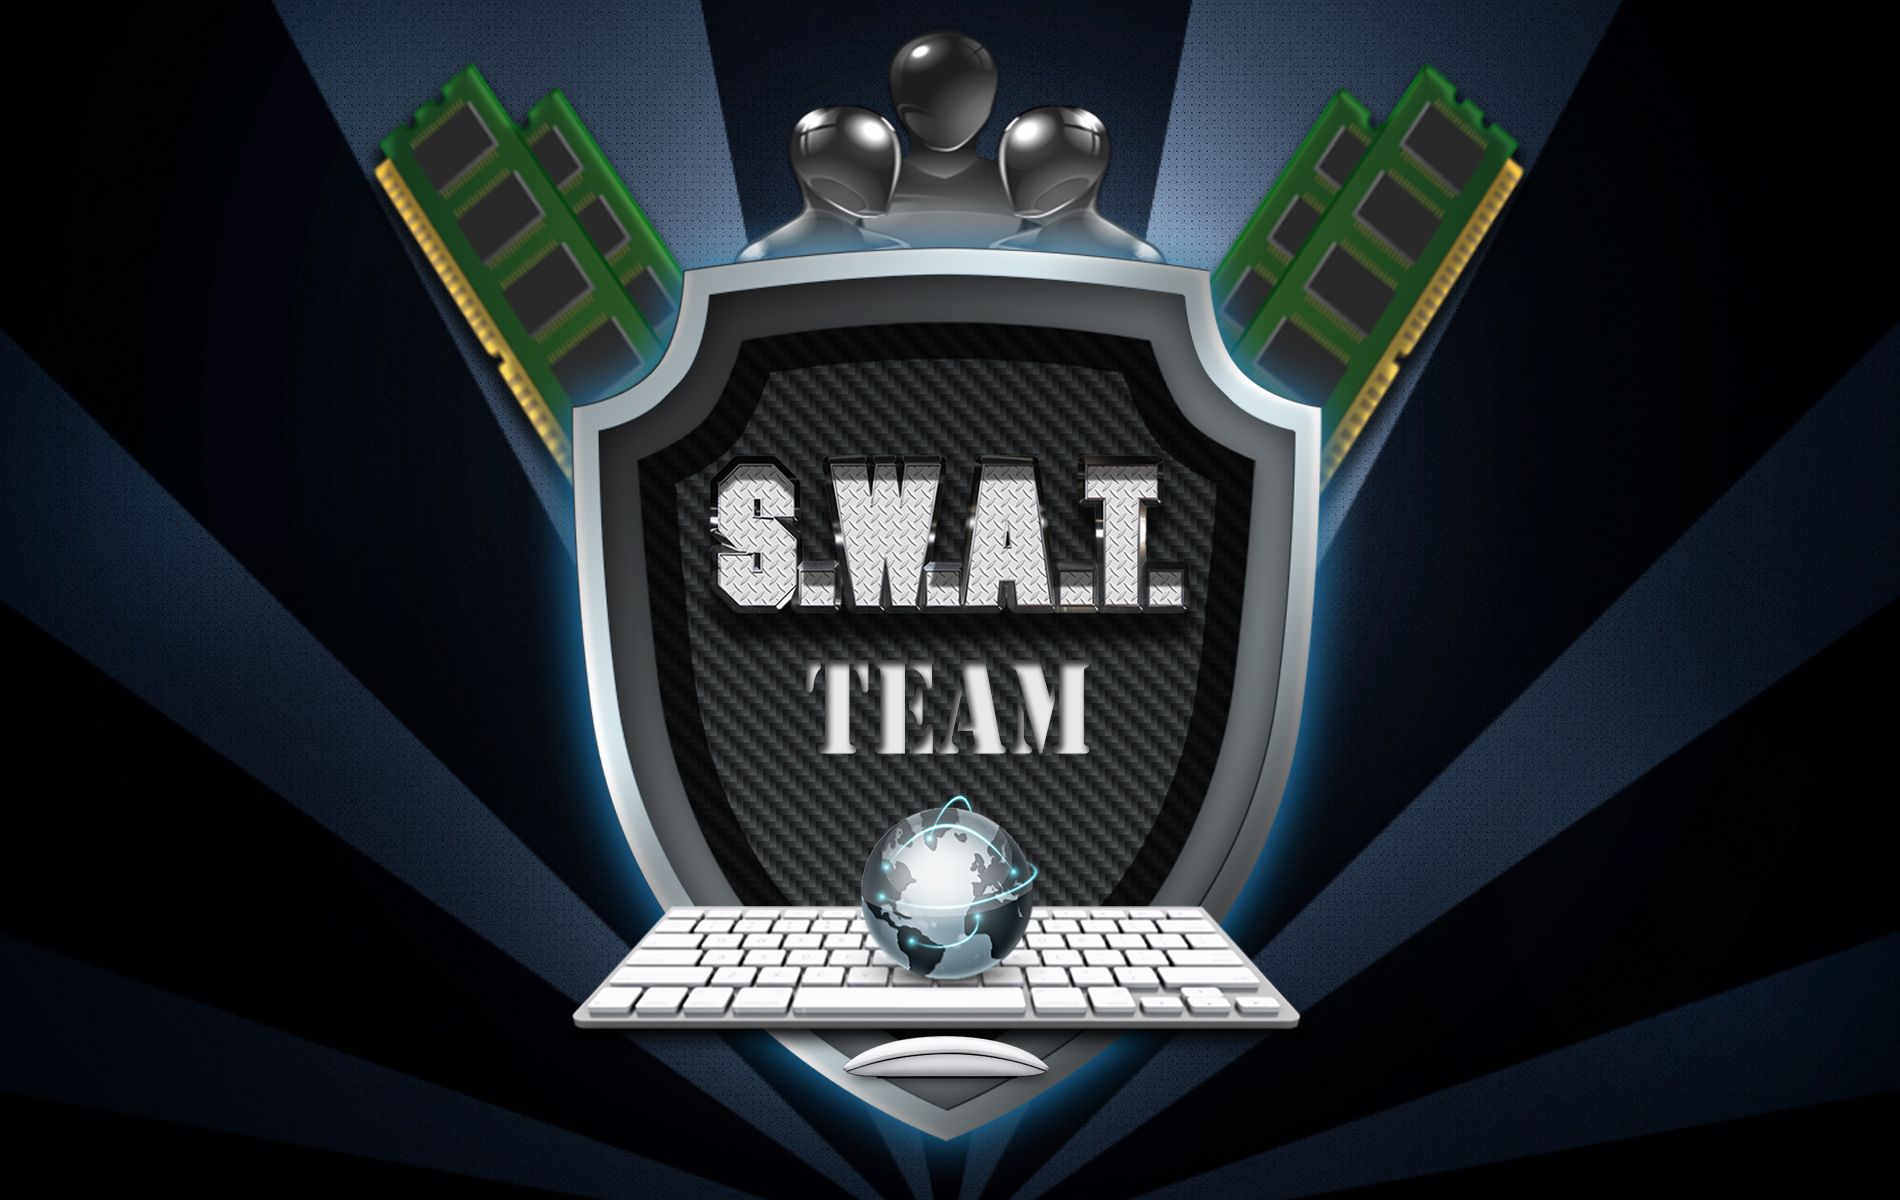 NYIT S.W.A.T. Team | Stefan Kamer: My Thoughts and Interests